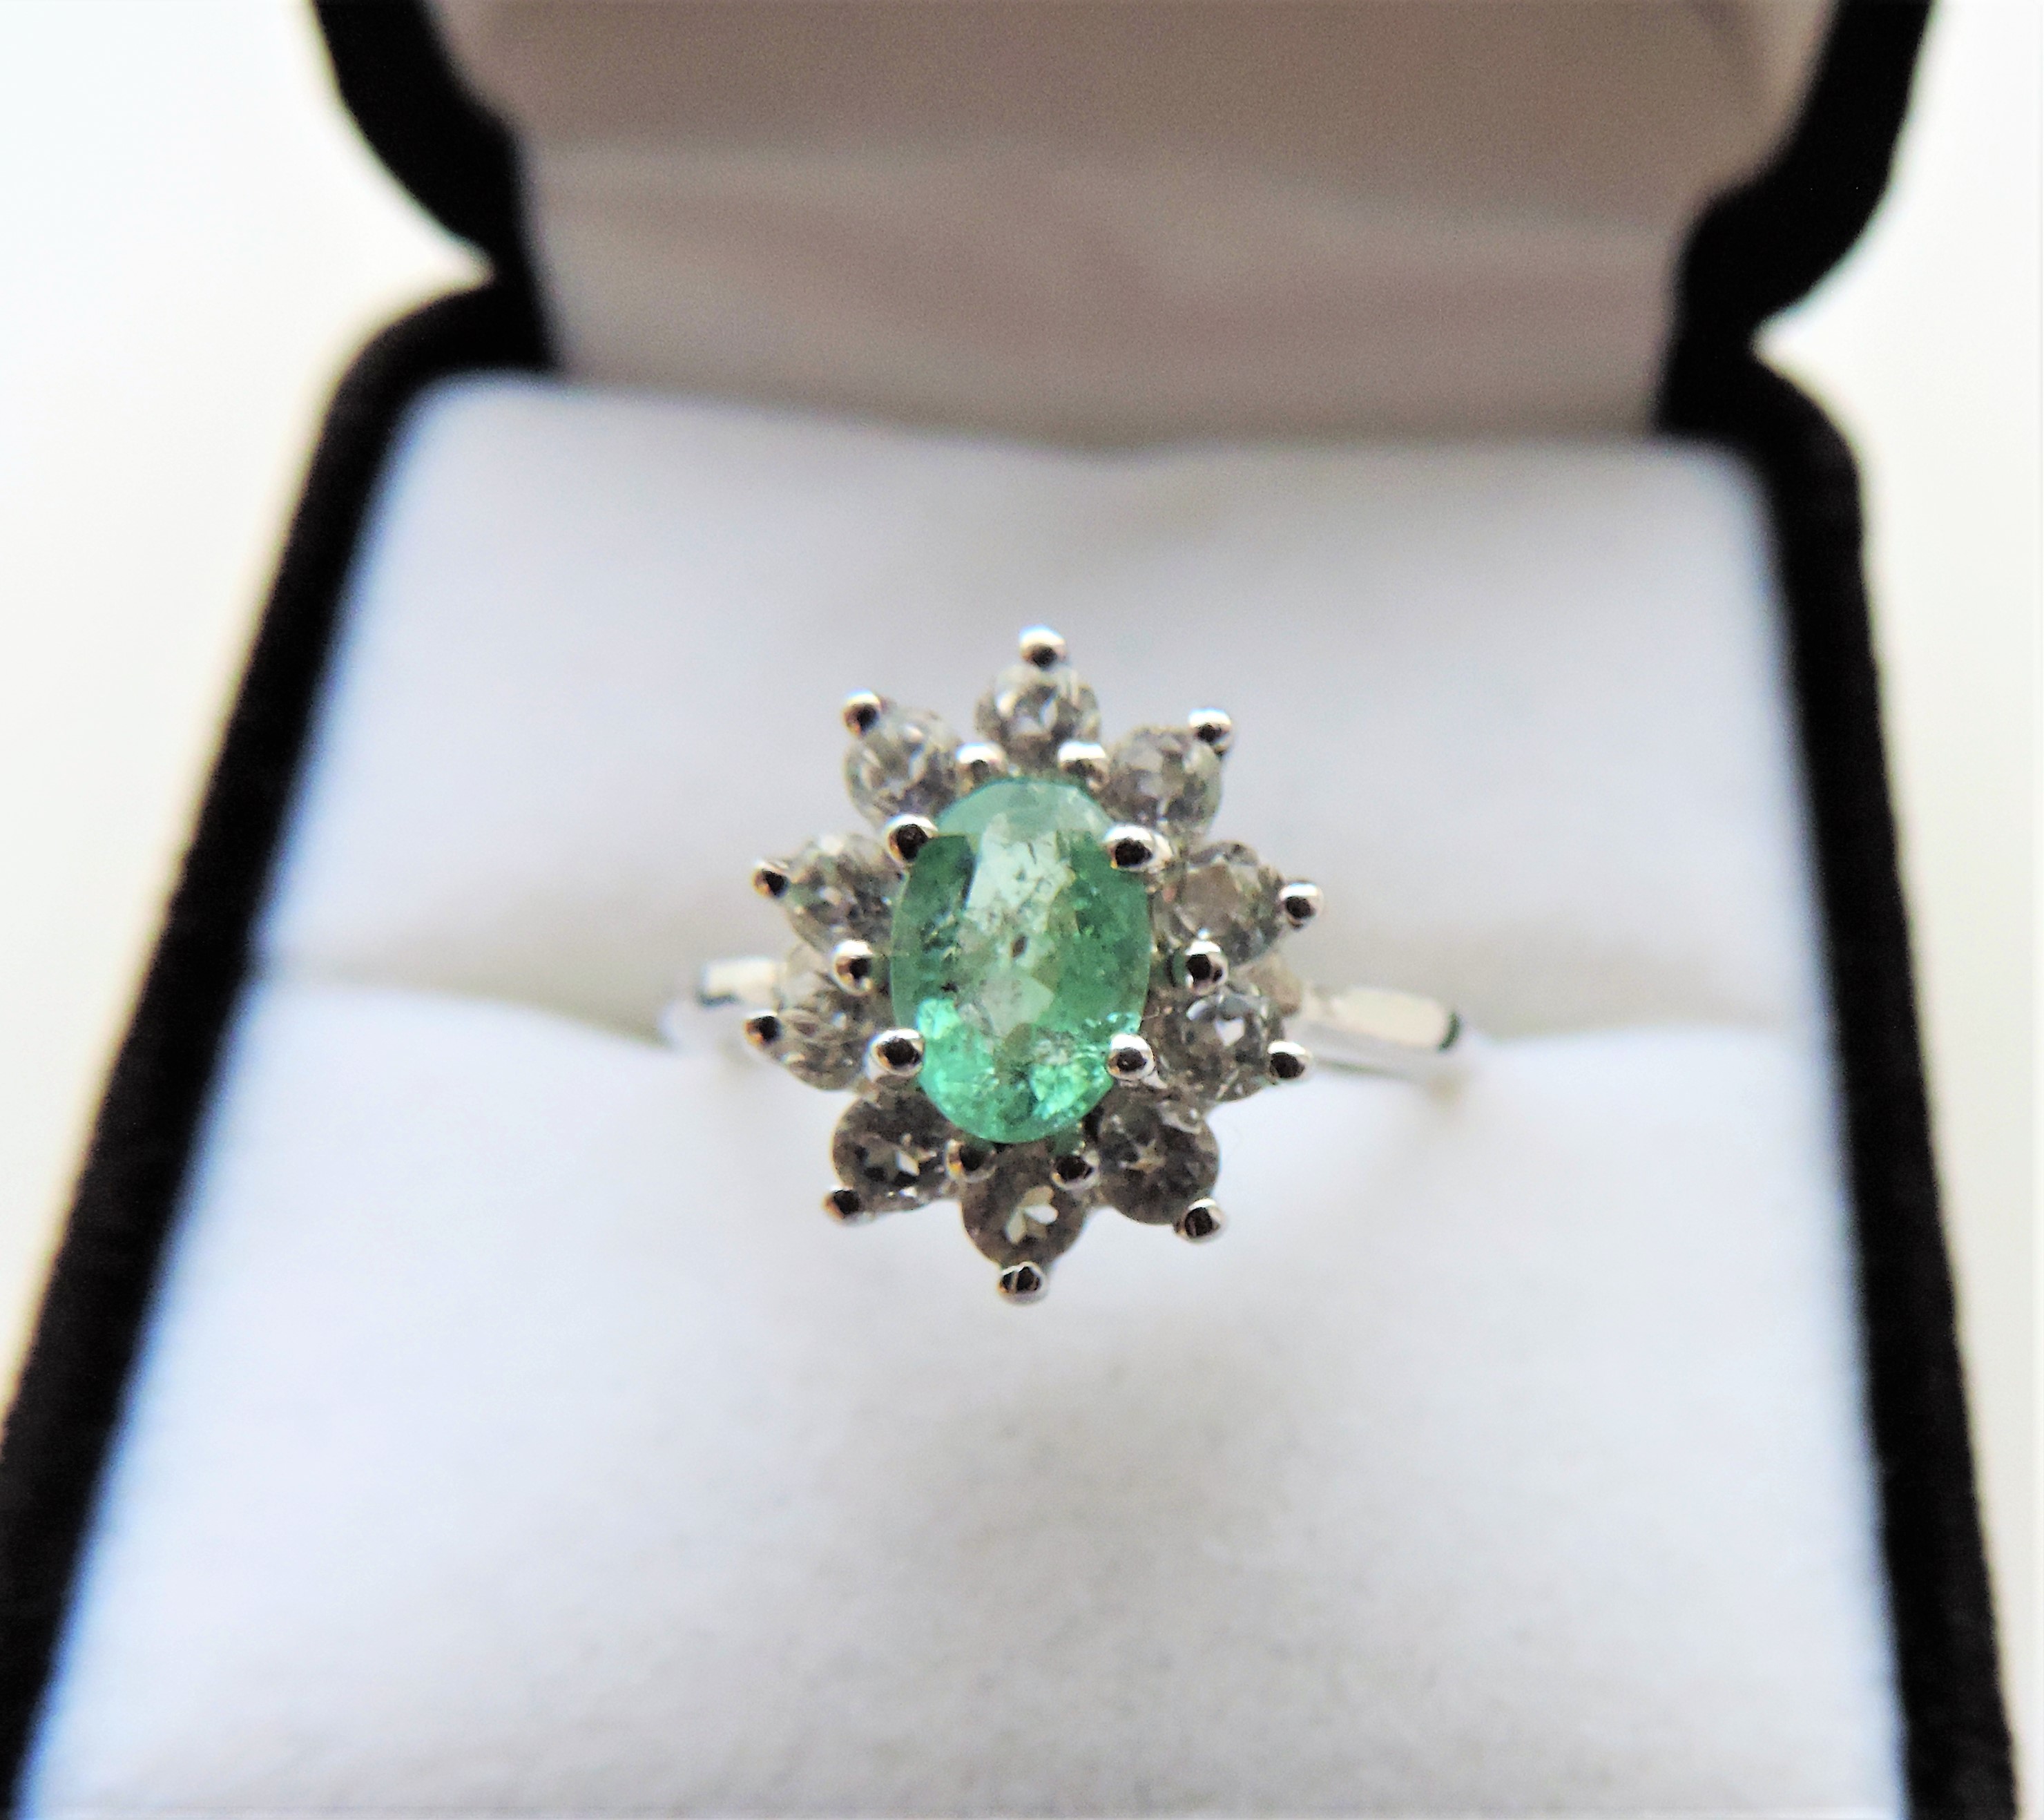 1.5 carat Green and White Topaz Ring - Image 6 of 6